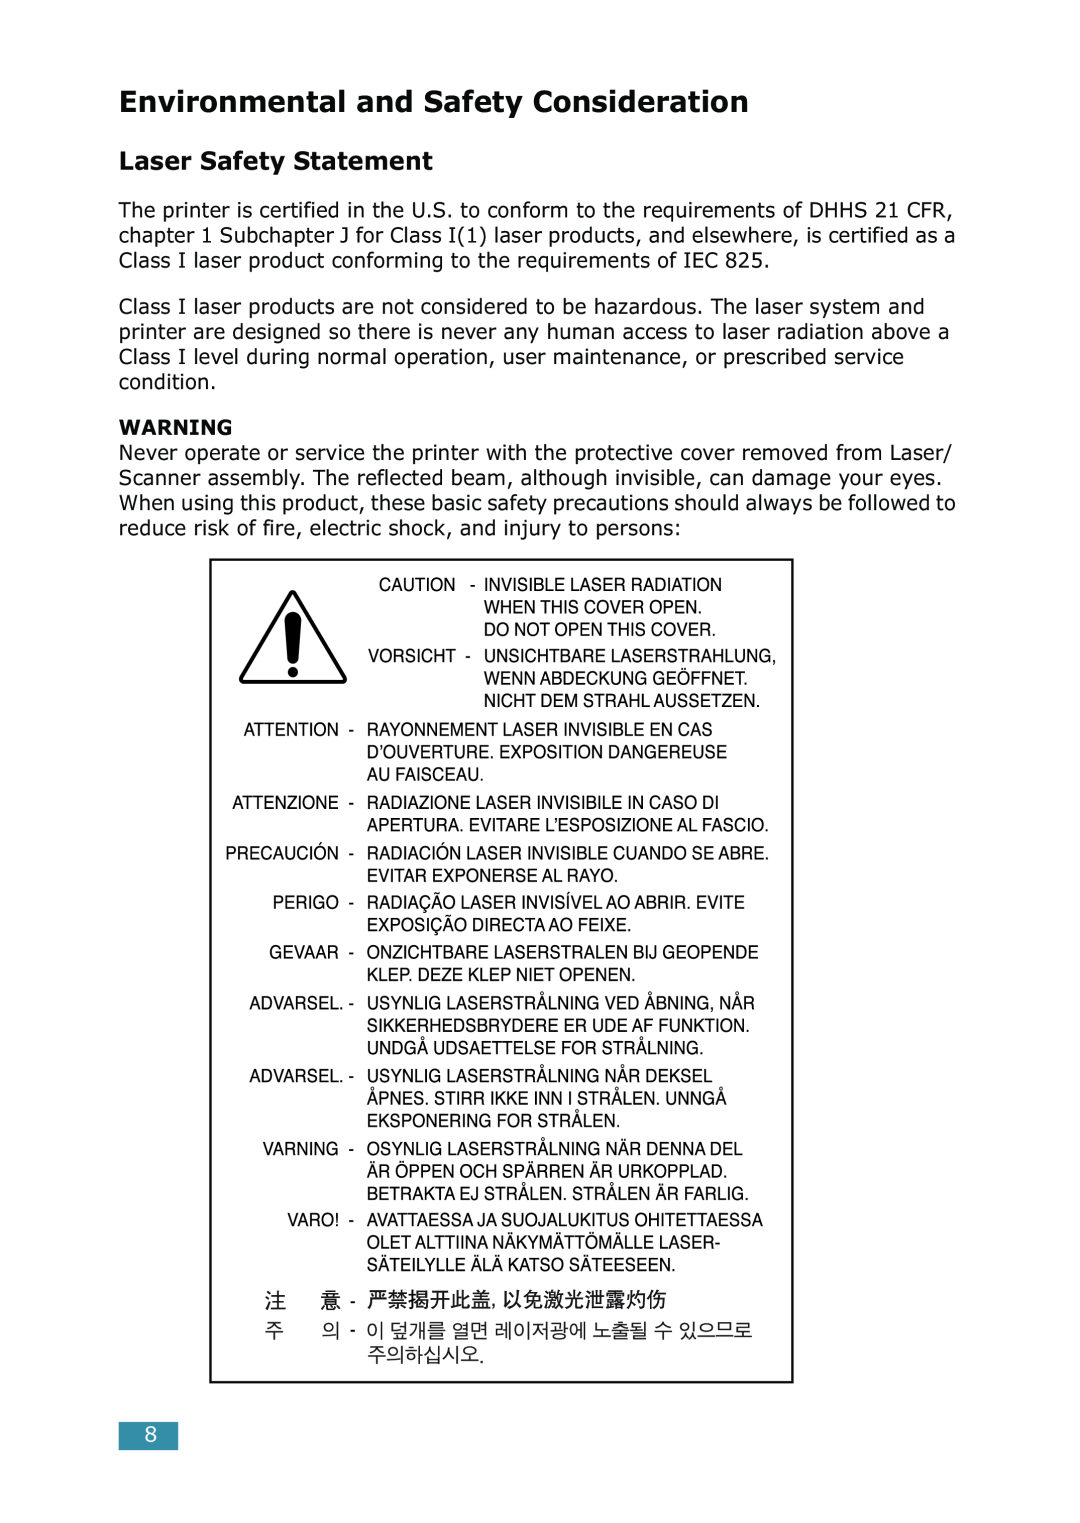 Samsung ML-1520 manual Environmental and Safety Consideration, Laser Safety Statement 